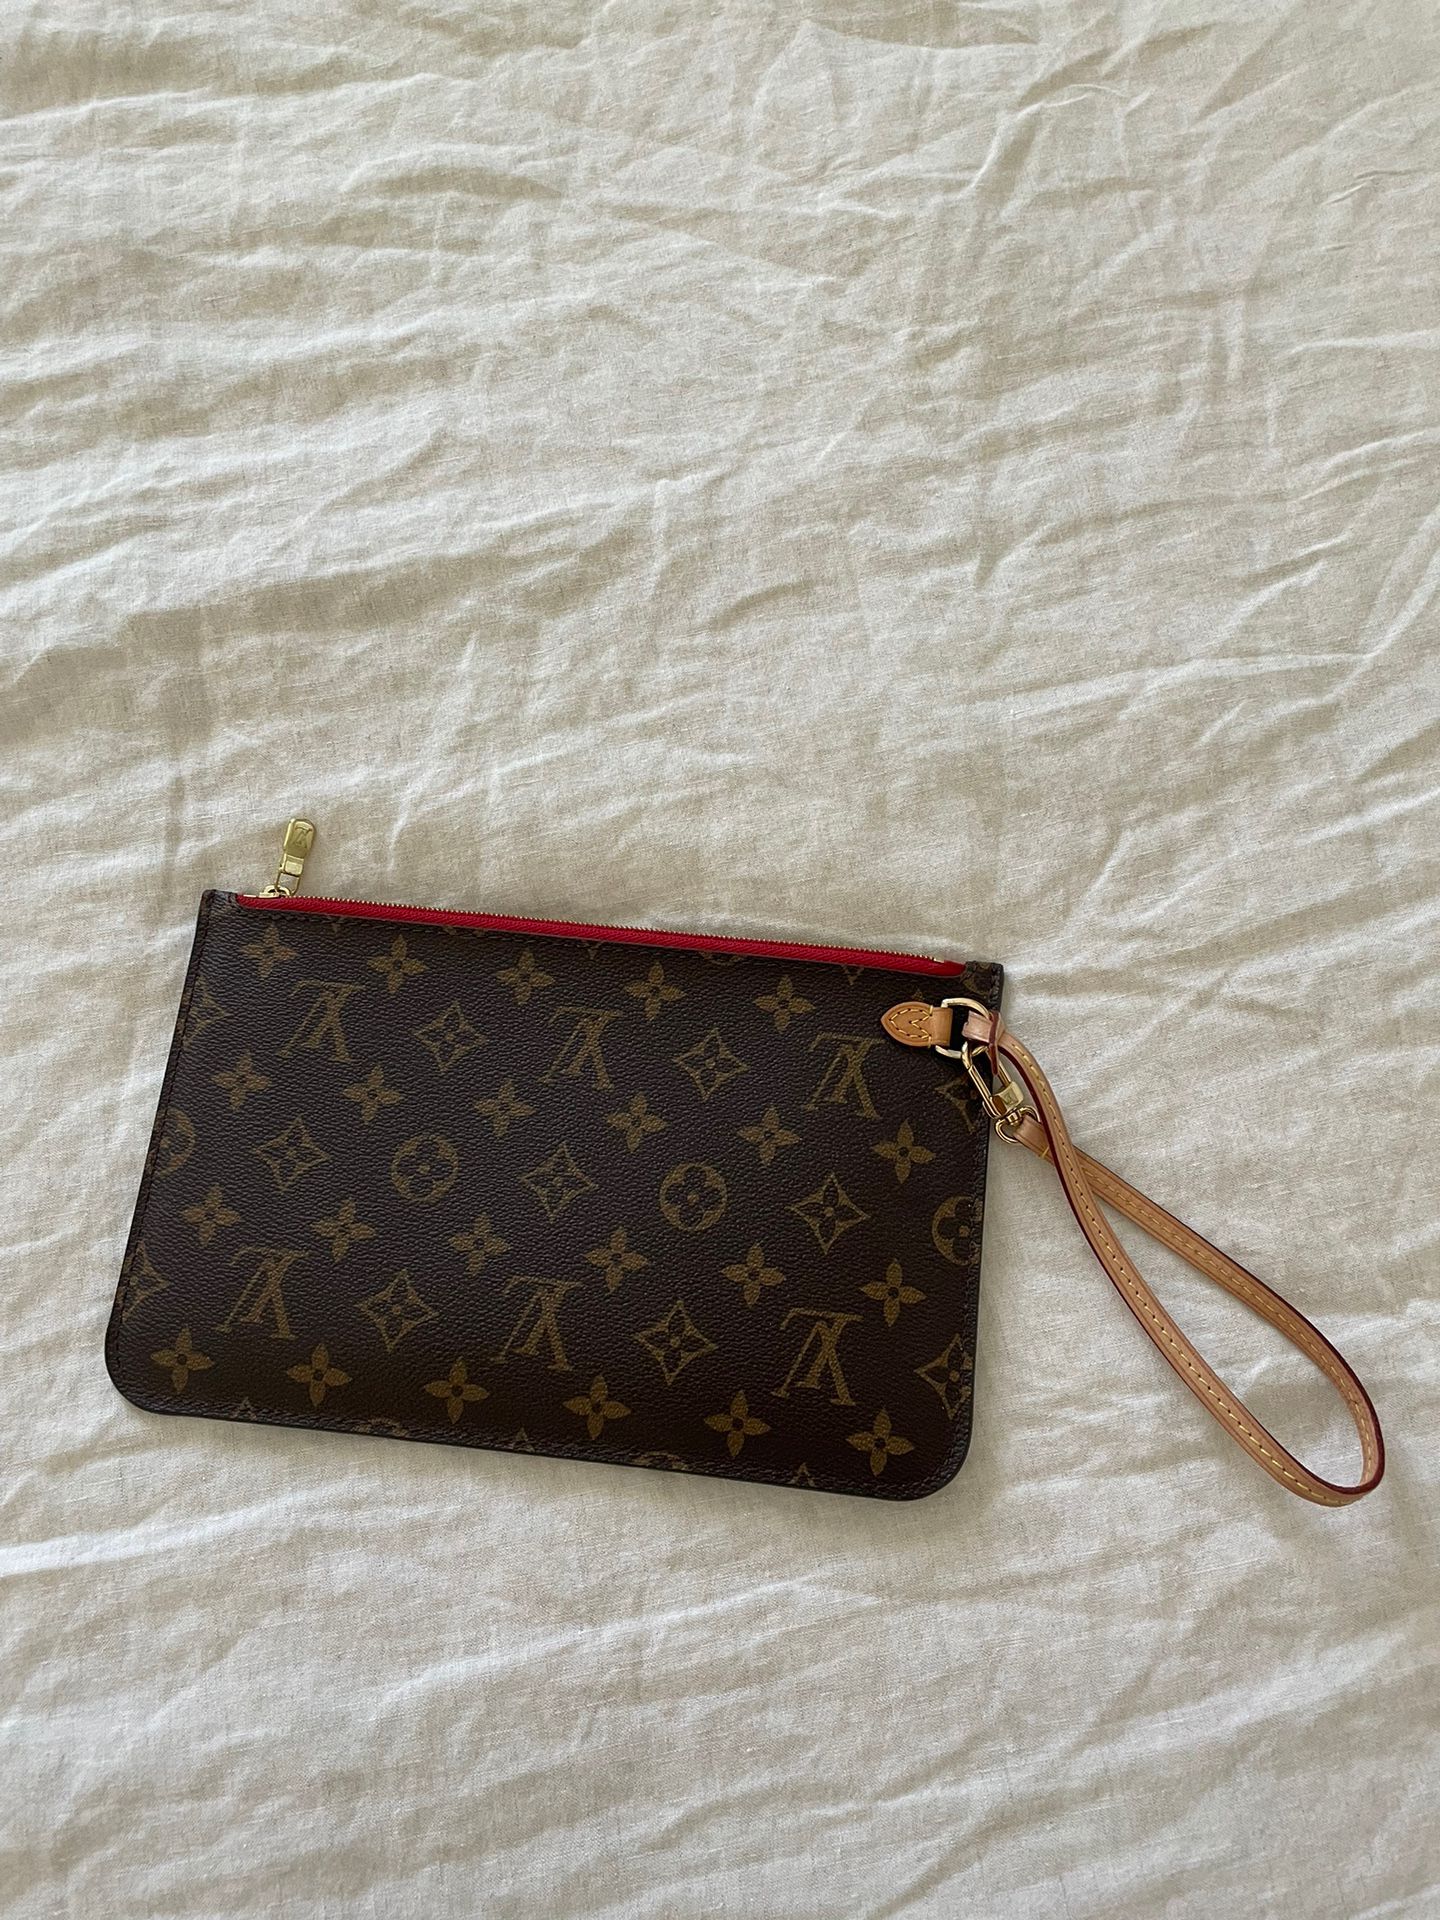 Authentic Louis Vuitton Shopping Bag, Box And Dust bag For NeverFull for  Sale in Redlands, CA - OfferUp